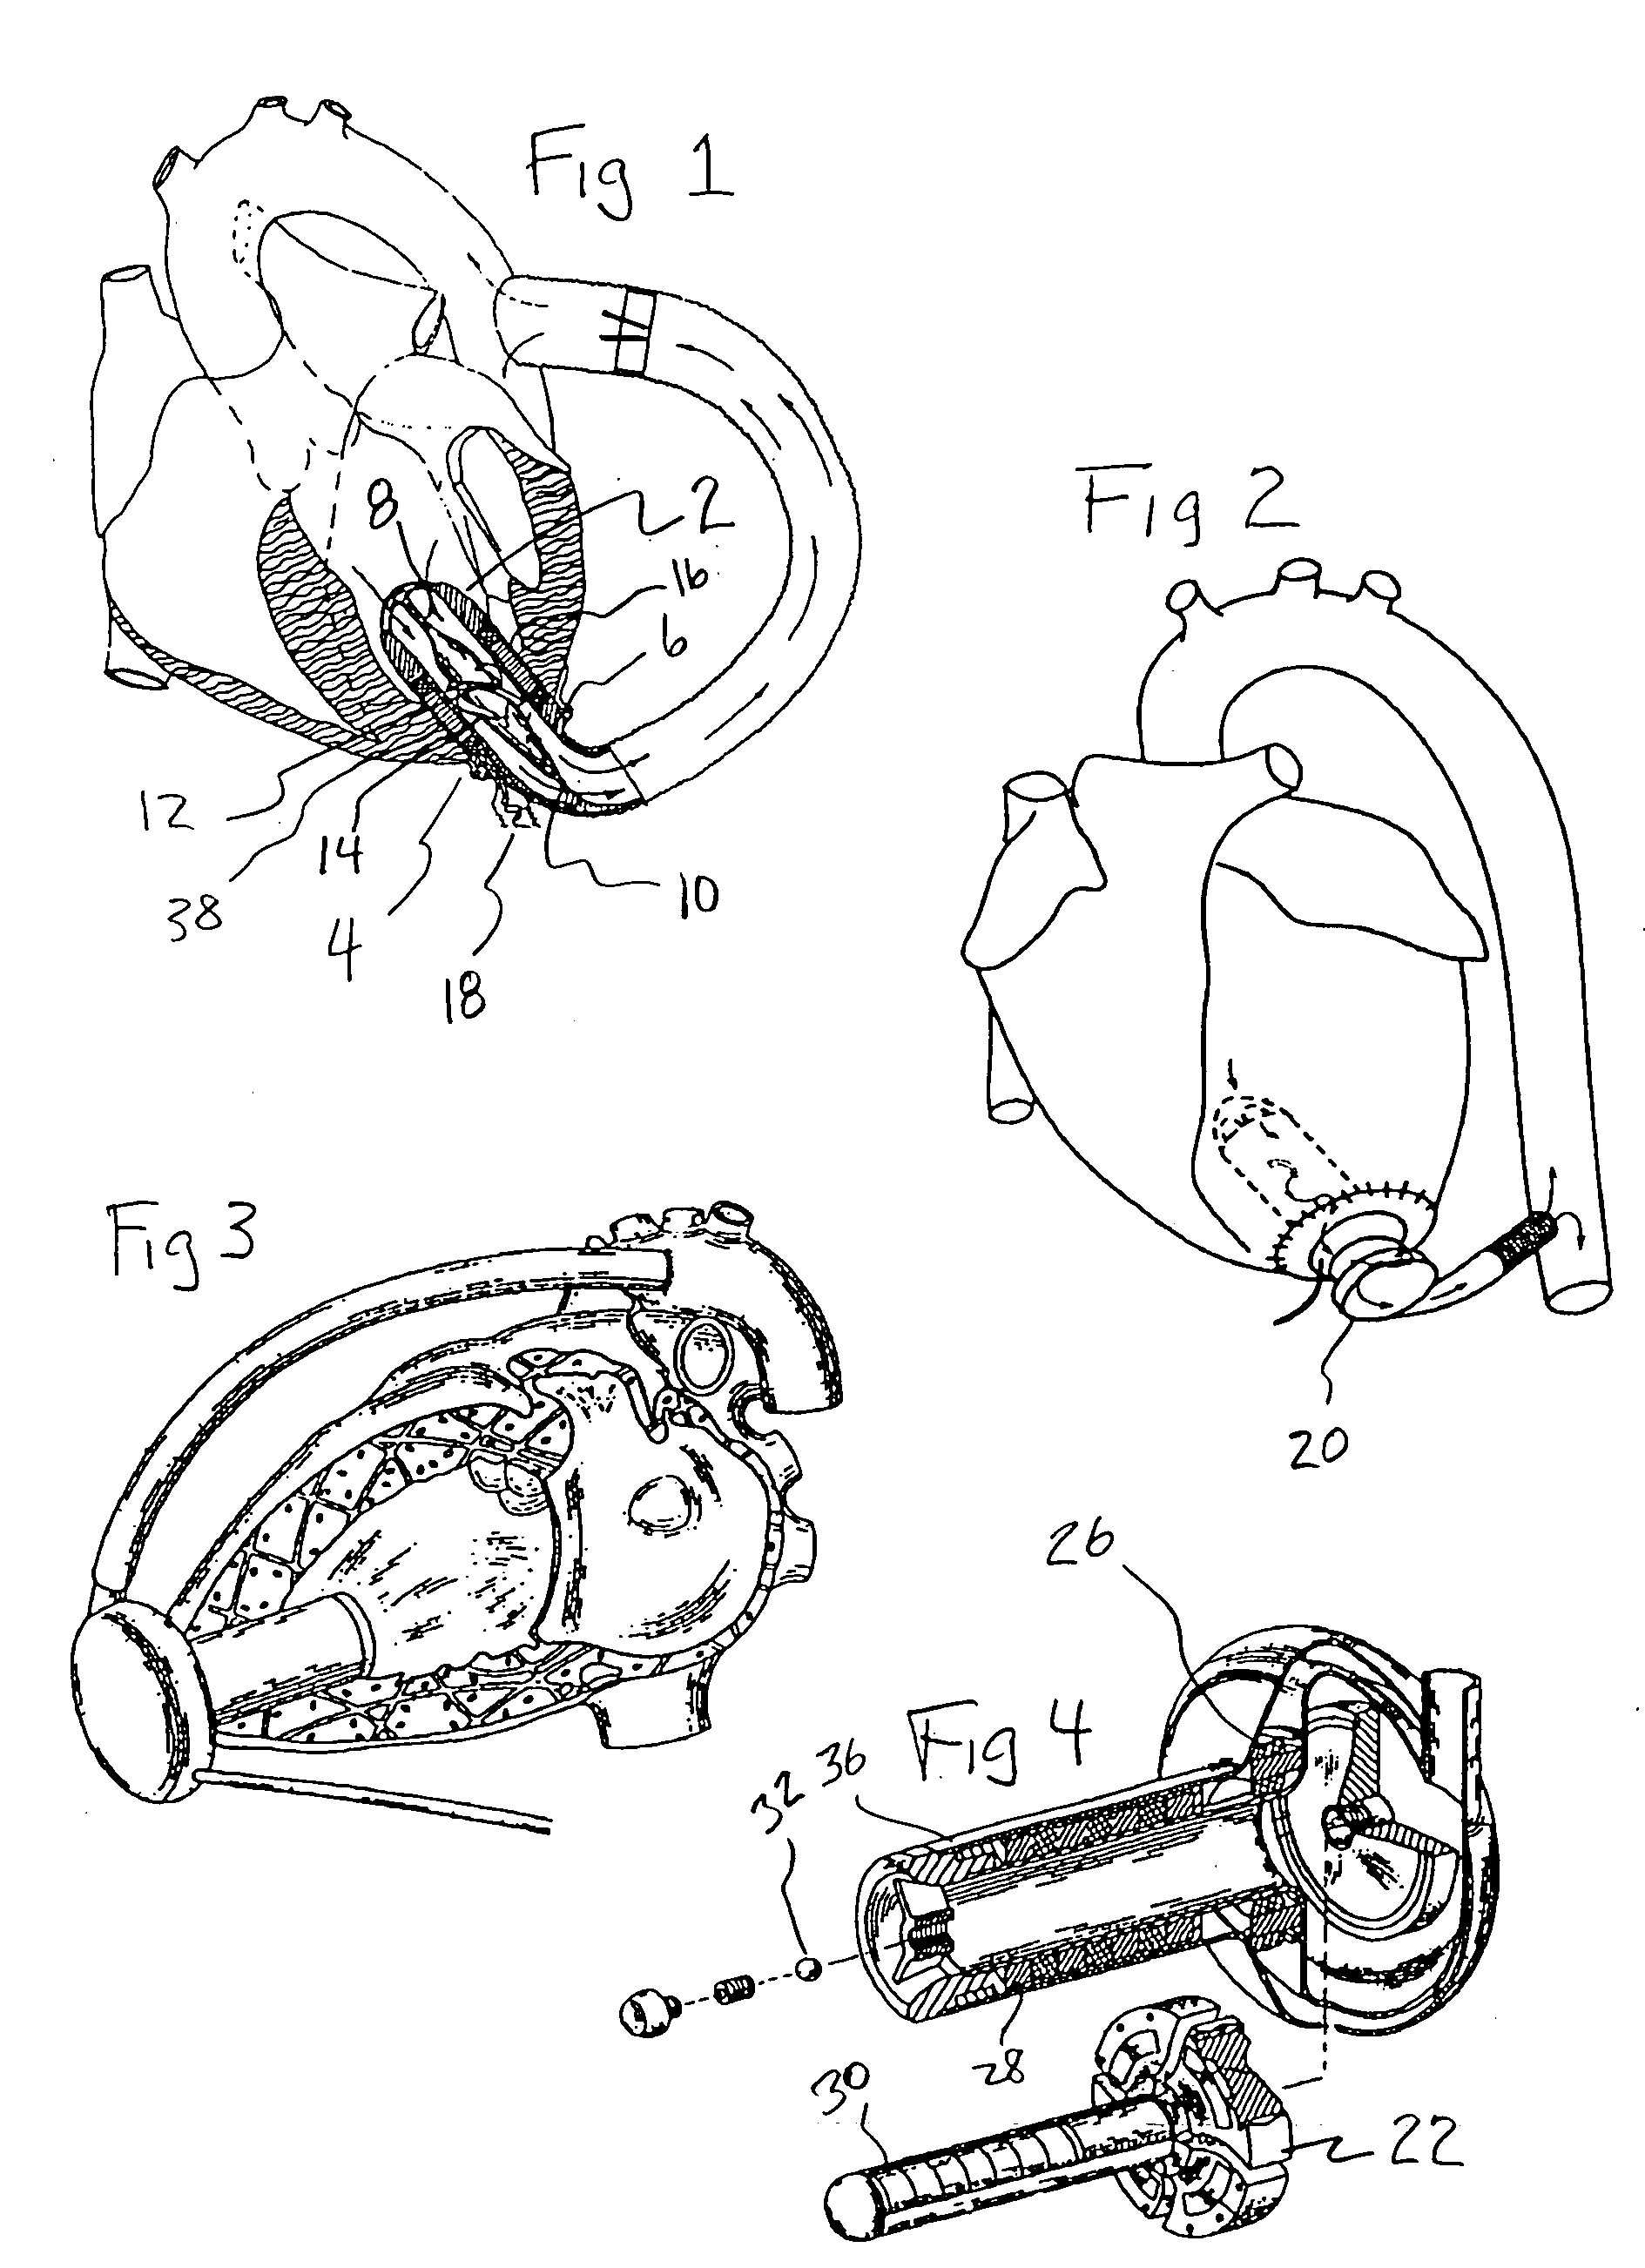 Textured conforming shell for stabilization of the interface of precision heart assist device components to tissues